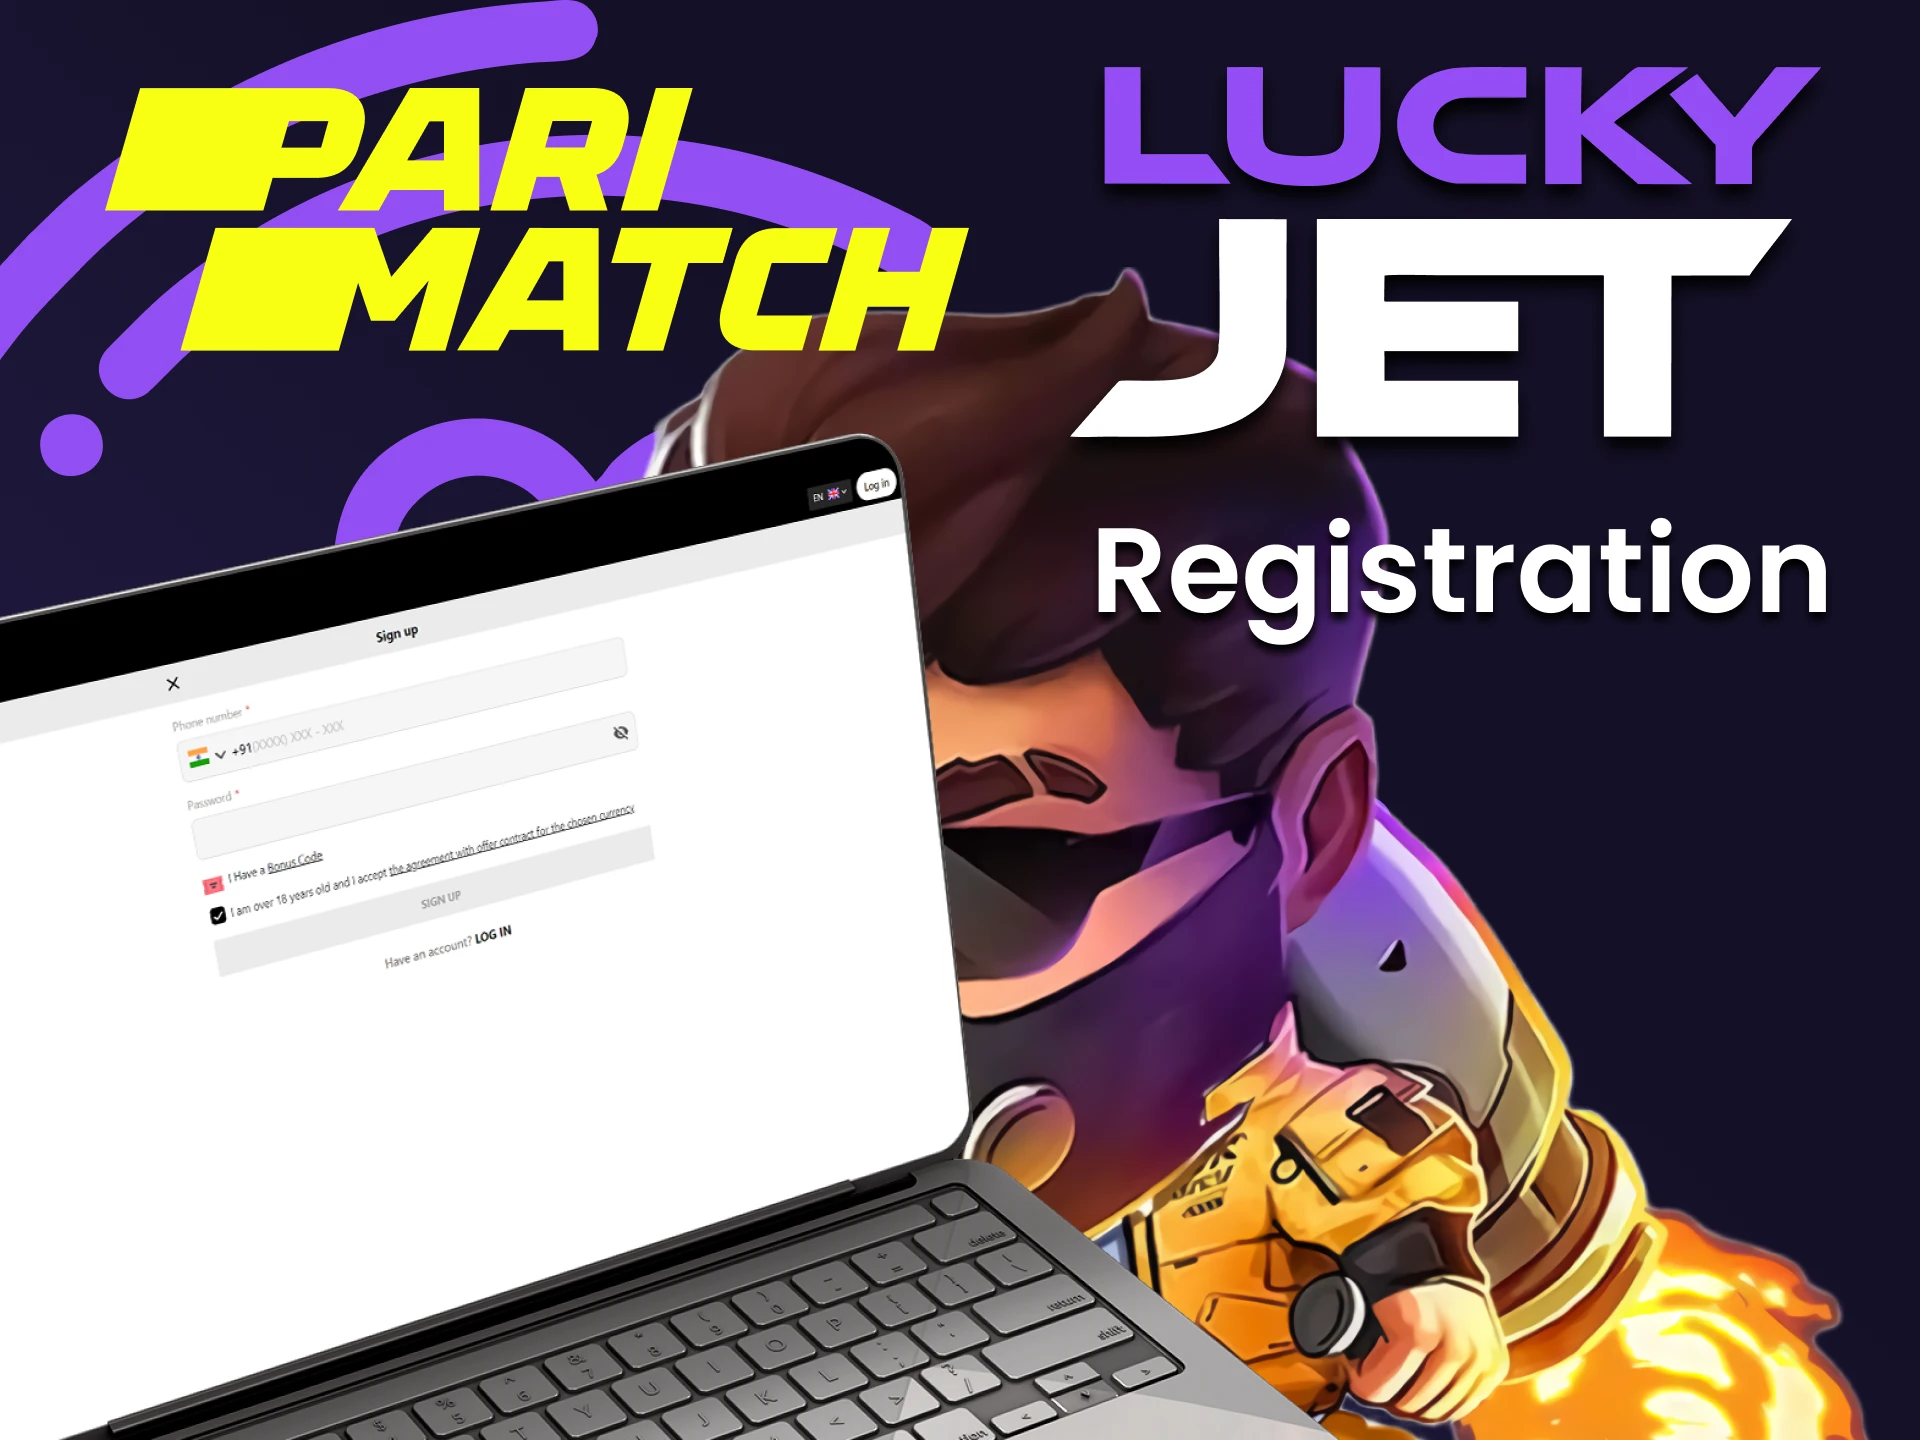 Create an account on Parimatch to play Lucky Jet.